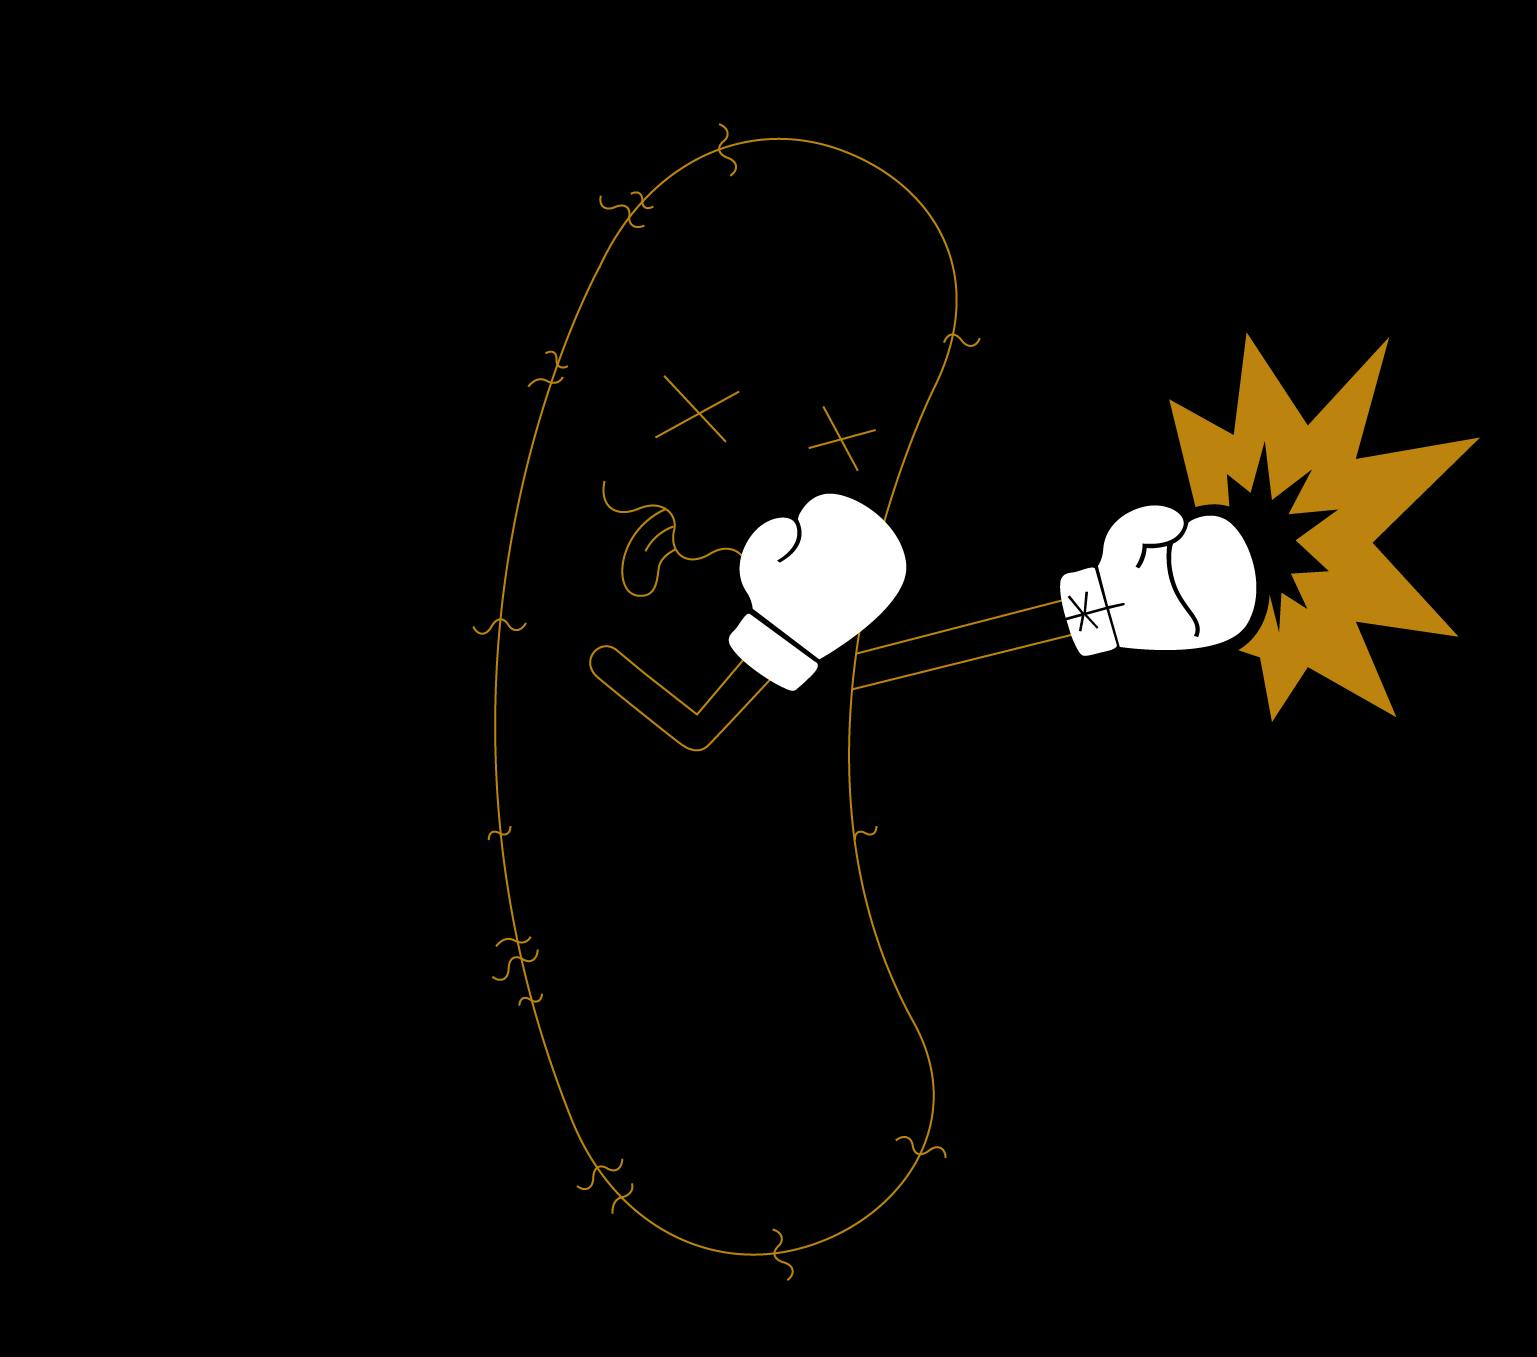 A gold outline of a bacteria with crosses for eyes and a tongue sticking out. The bacteria has little arms and is wearing white boxing gloves. The bacteria's right hard is held near its face and its left arm is outstretched. At the end of the left boxing glove is a gold explosion effect.